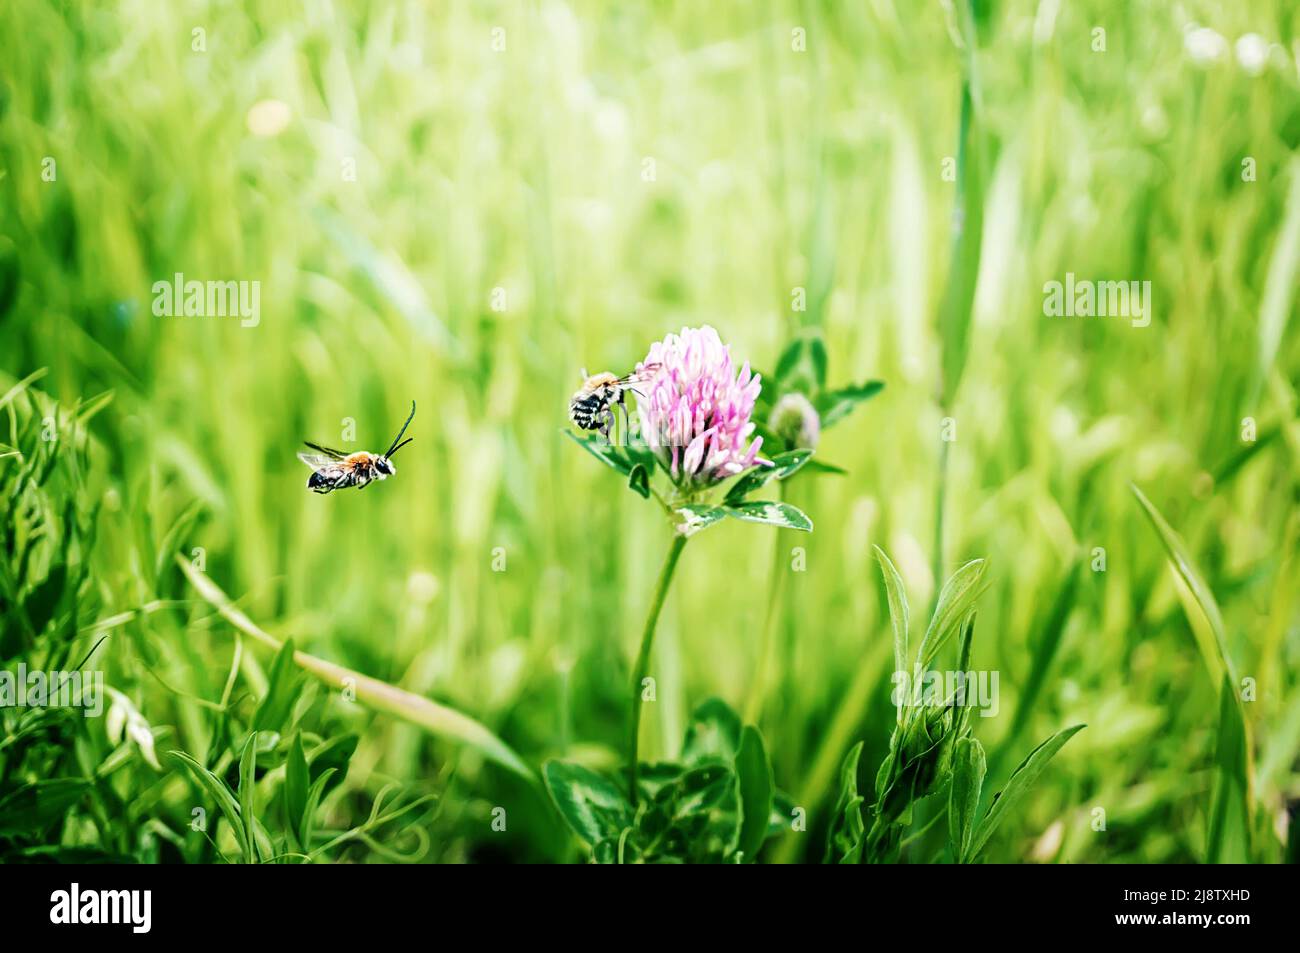 Two bees on a clover flower. Trifolium pratense, pink clover in the meadow. Clover with pink flowers and Poa annua, or annual meadow grass on the lawn Stock Photo